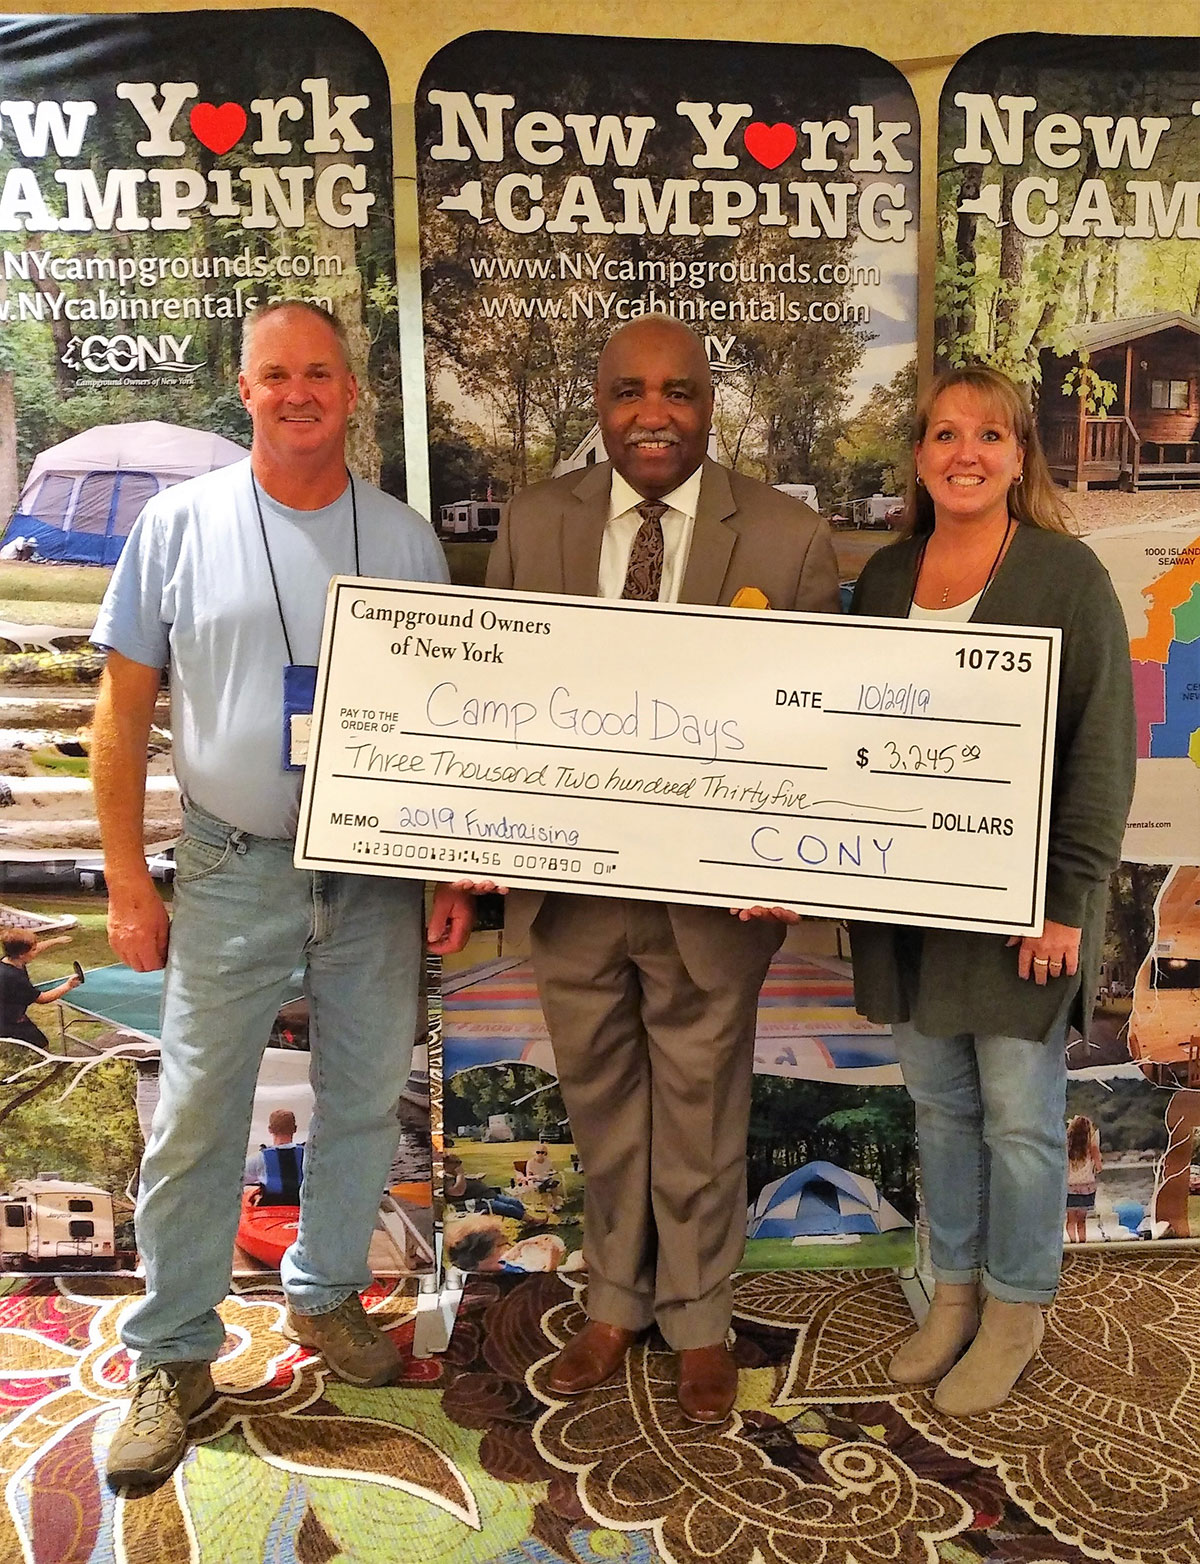 Campground owners pose with Camp Good Days rep and oversize check